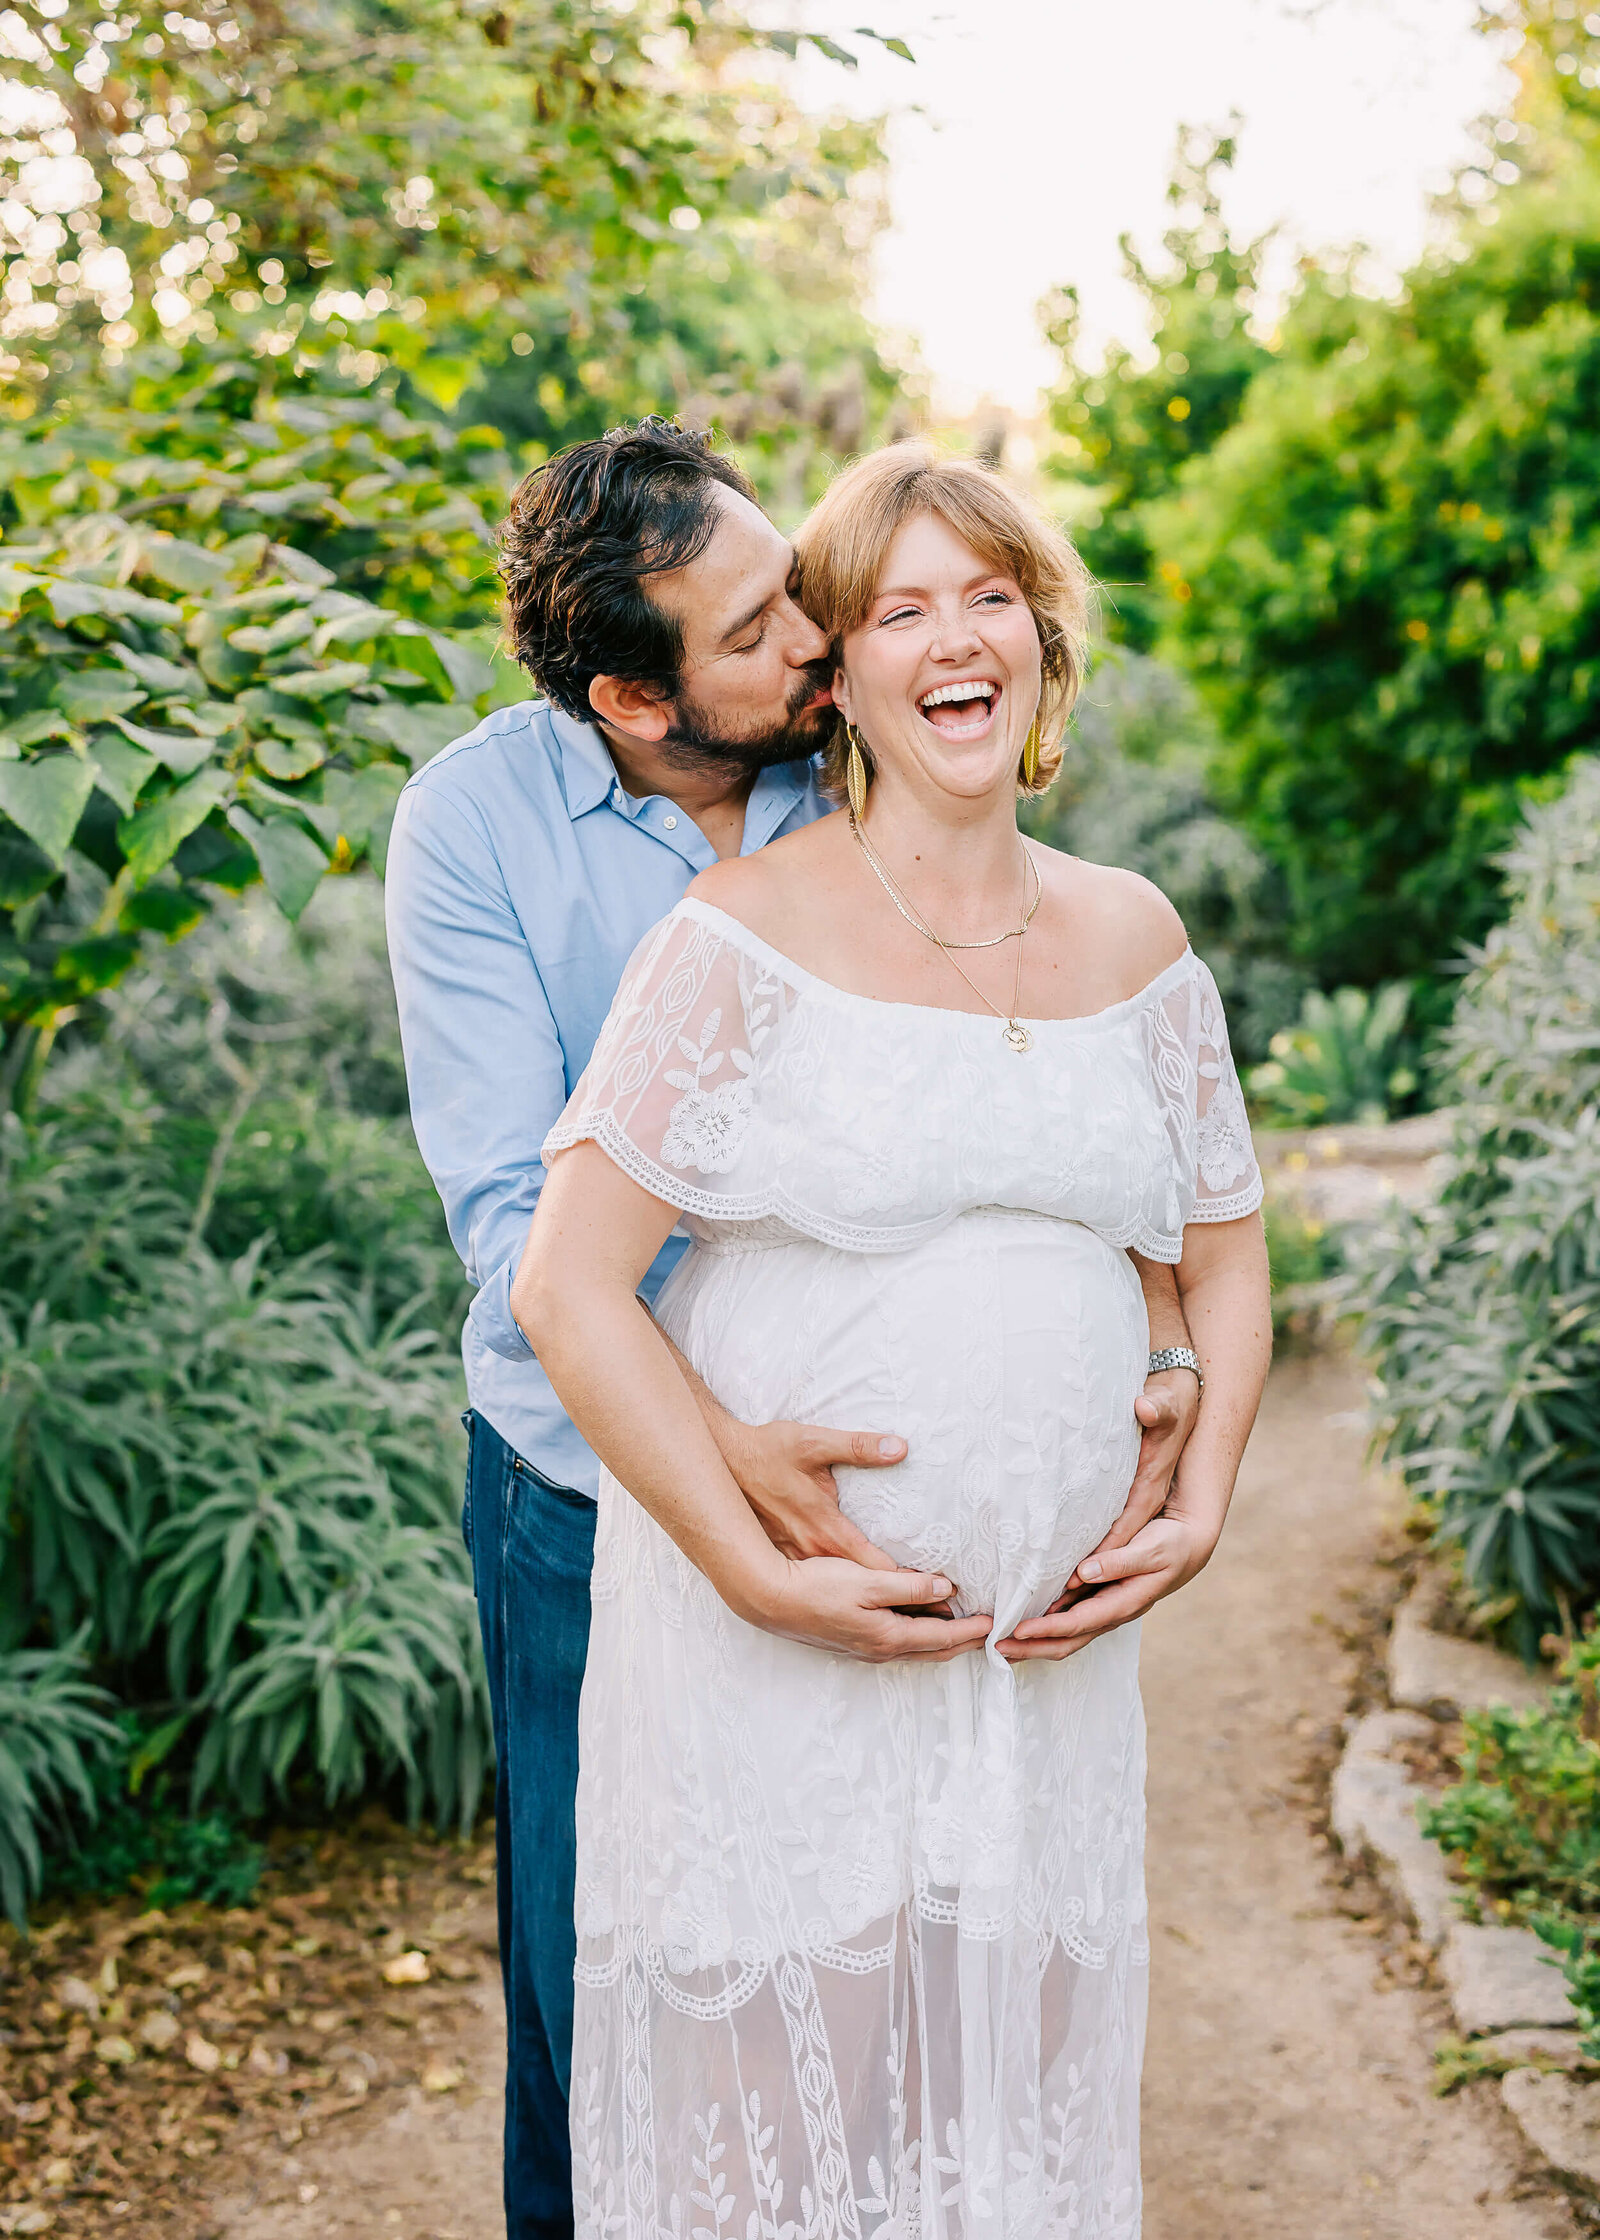 Couple embraced laughing during maternity session by Ashley Nicole Photography in Huntington Beach.